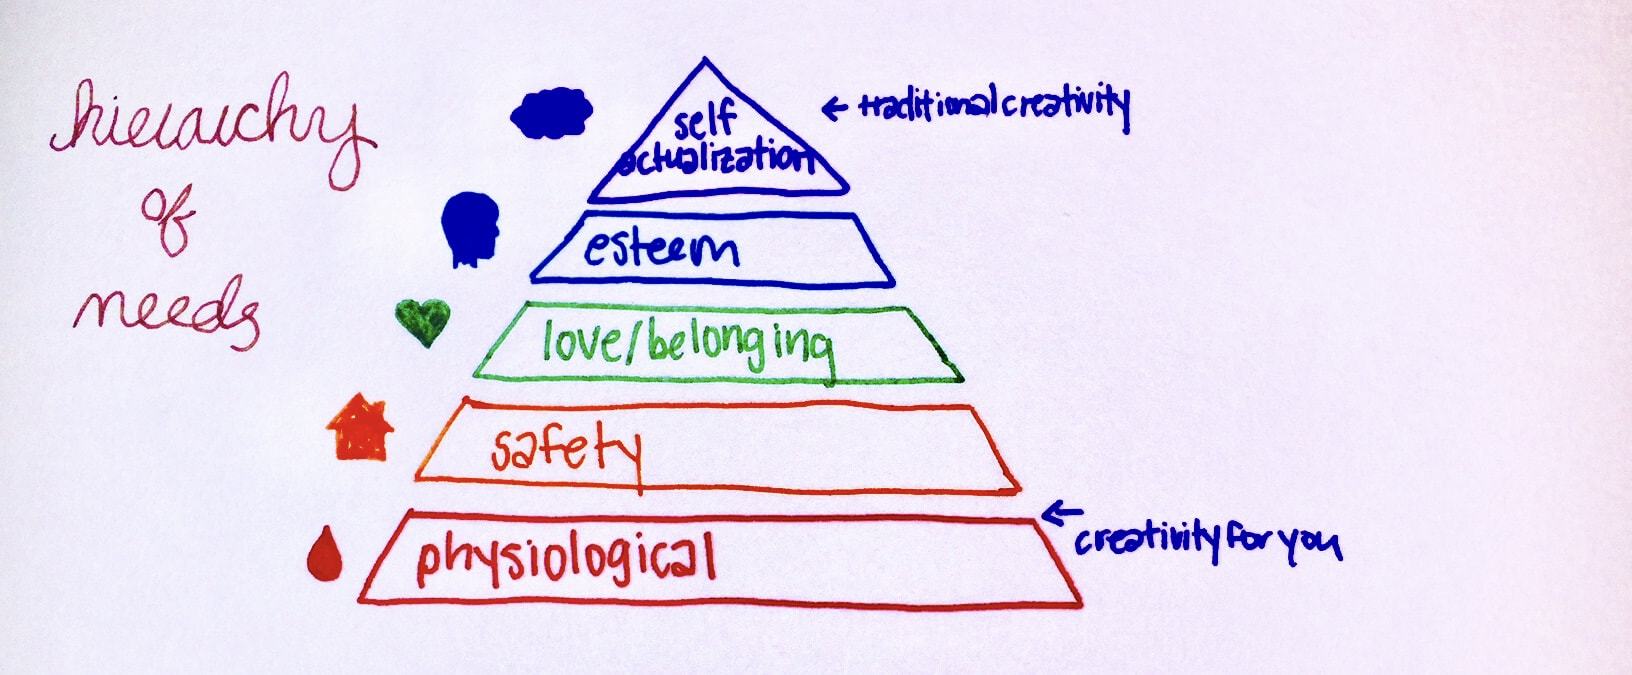 Hand-drawn pyramid of Maslow's Hierarchy of Needs, reinvisioned for Creative People, by Cindy Cisneros, Creativity Coach and Creativity Counselor |  Therapy for Creatives in Maryland, Online Creativity Counseling in Maryland and Virginia with Creativity Counselor and Creativity Coach, Cindy Cisneros